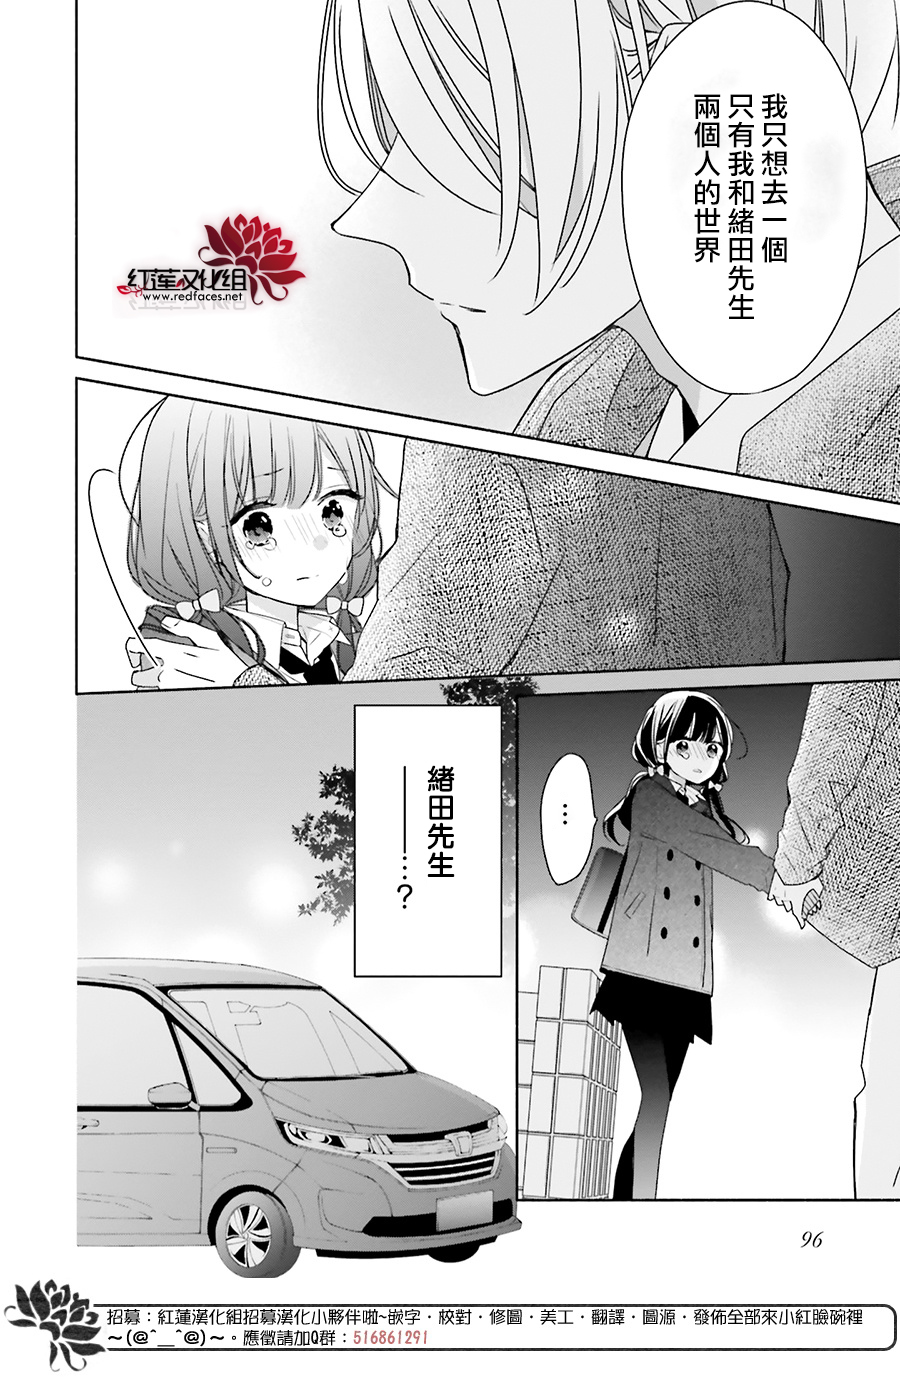 If given a second chance - 第34話 - 6